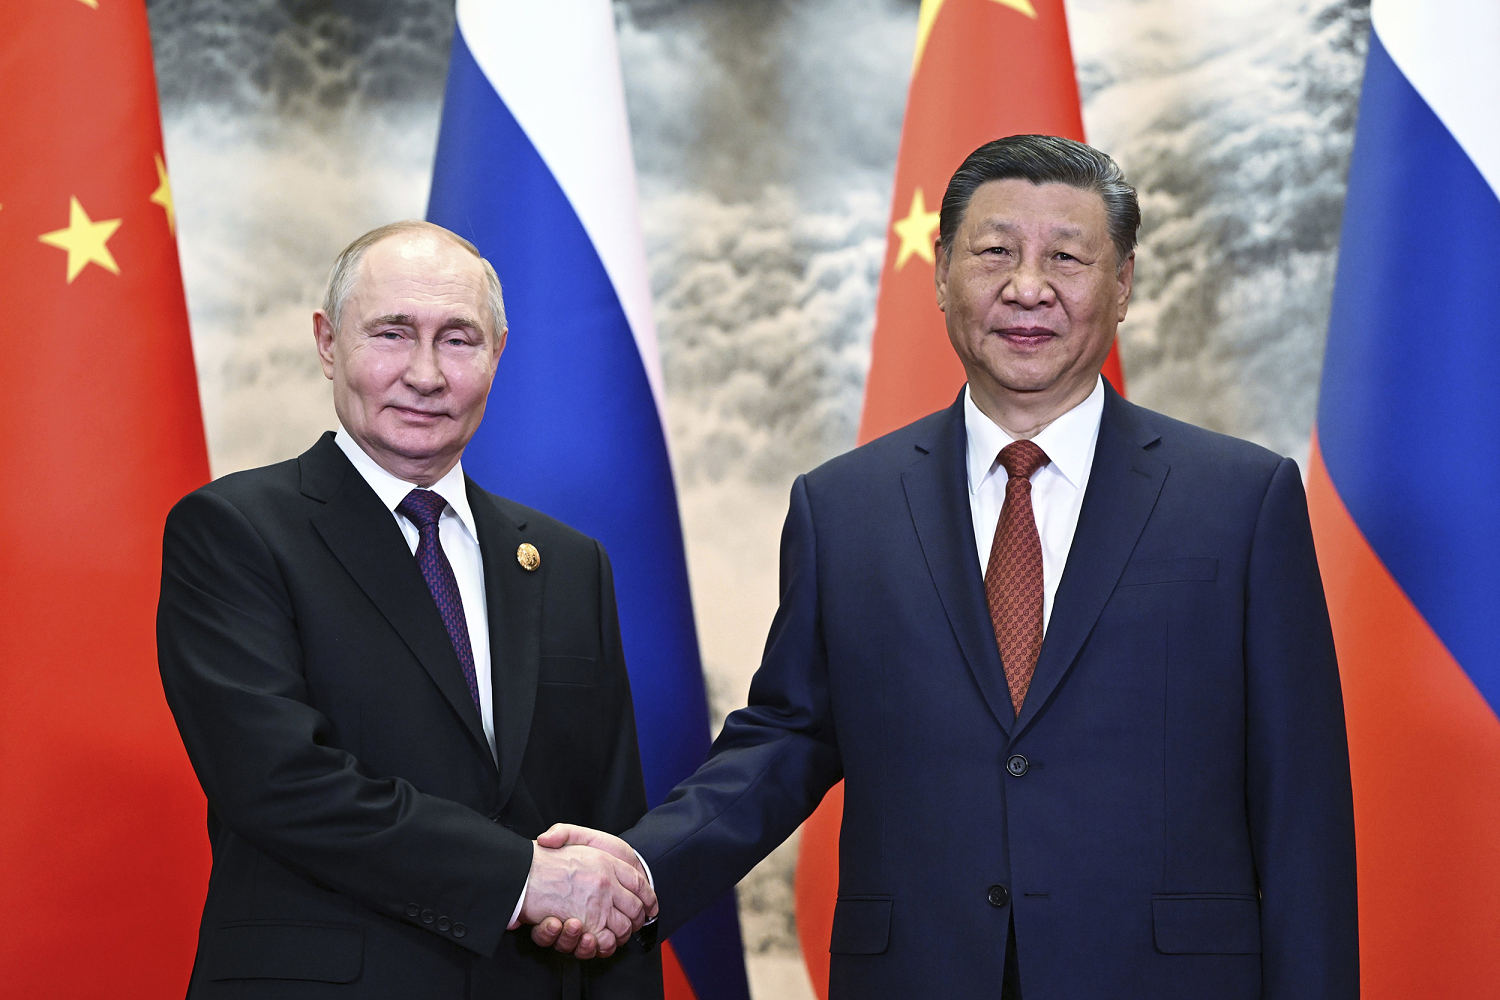 Putin and Xi vow to deepen 'no limits' partnership as Russia advances in Ukraine